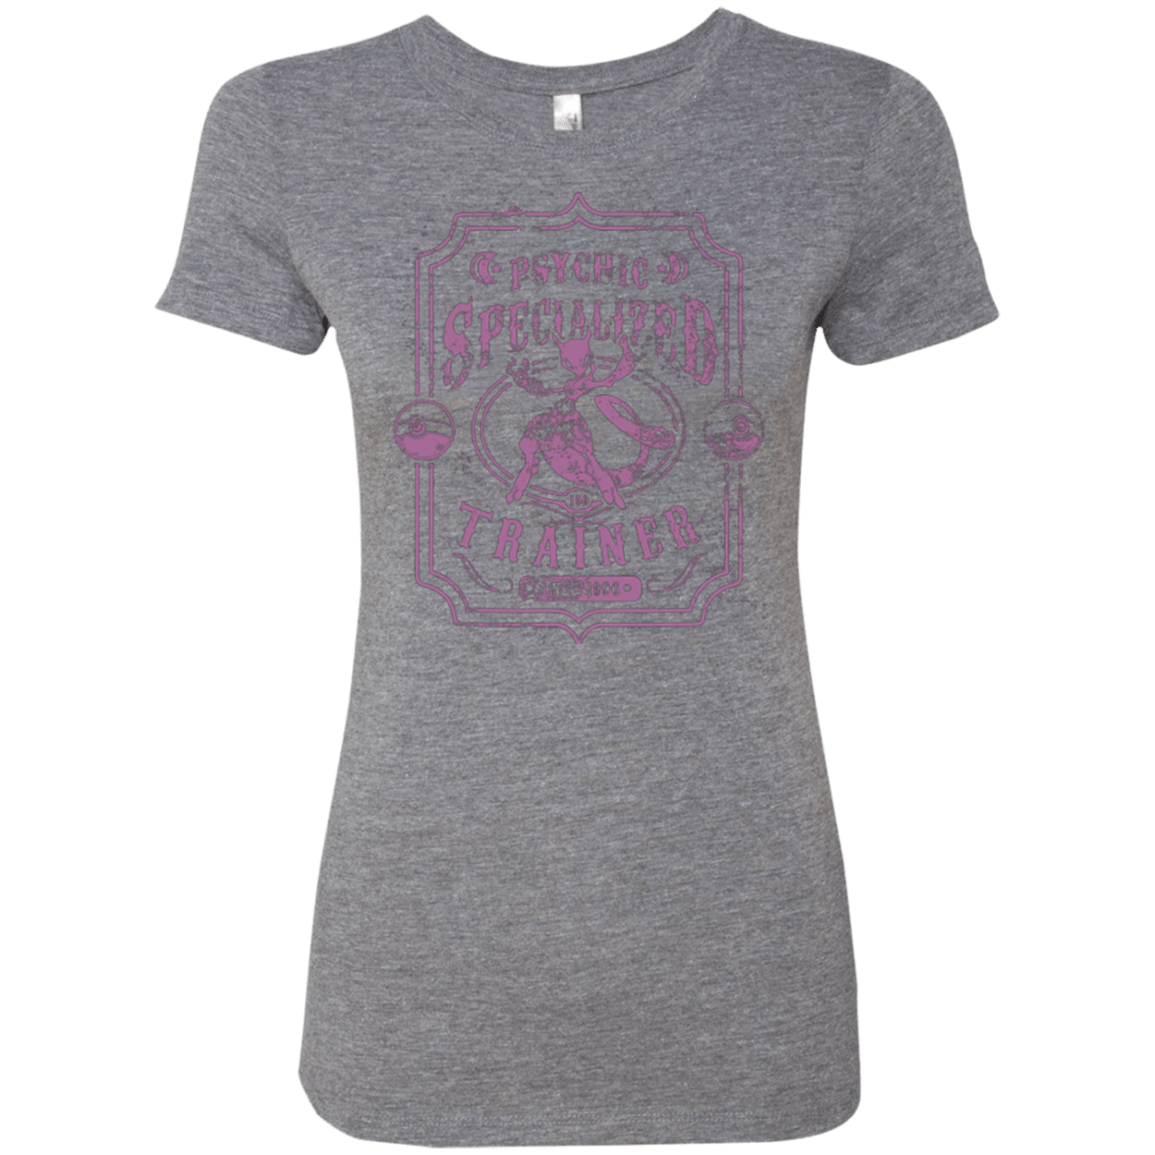 T-Shirts Premium Heather / Small Psychic Specialized Trainer 2 Women's Triblend T-Shirt